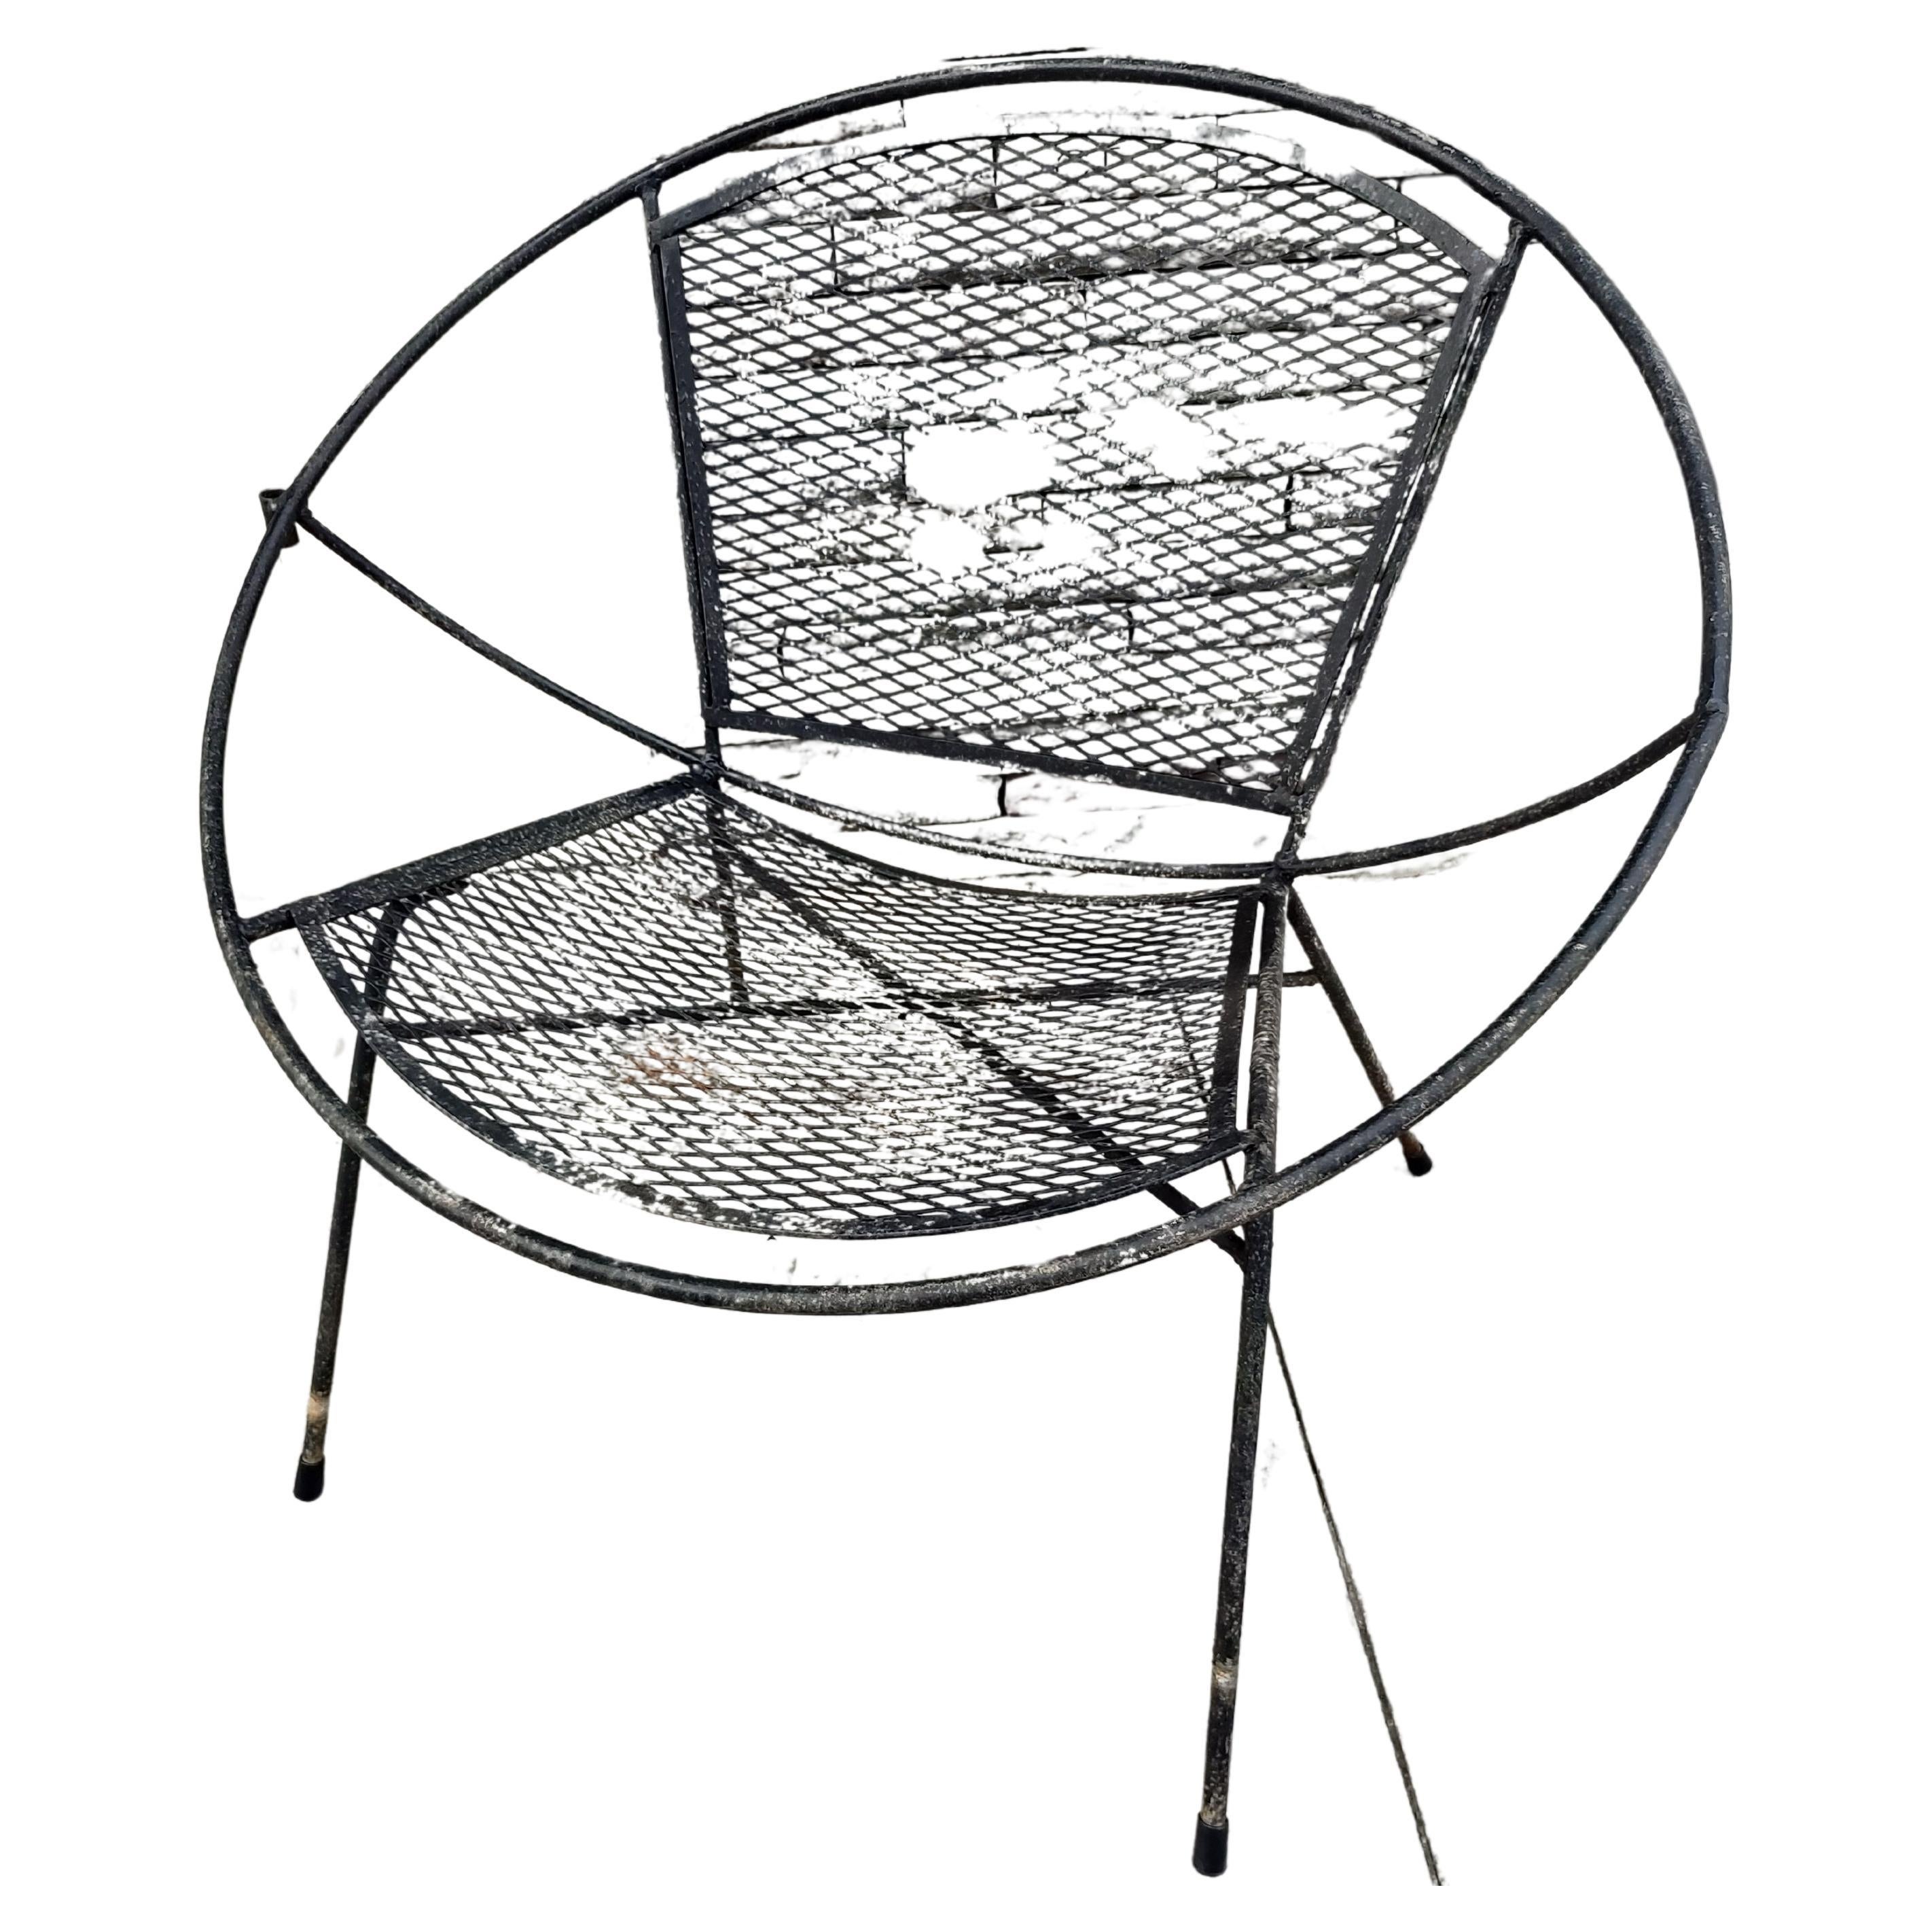 American Mid-Century Modern Iron Hoop Lounge Chair by Maurizio Tempestini for Salterini  For Sale